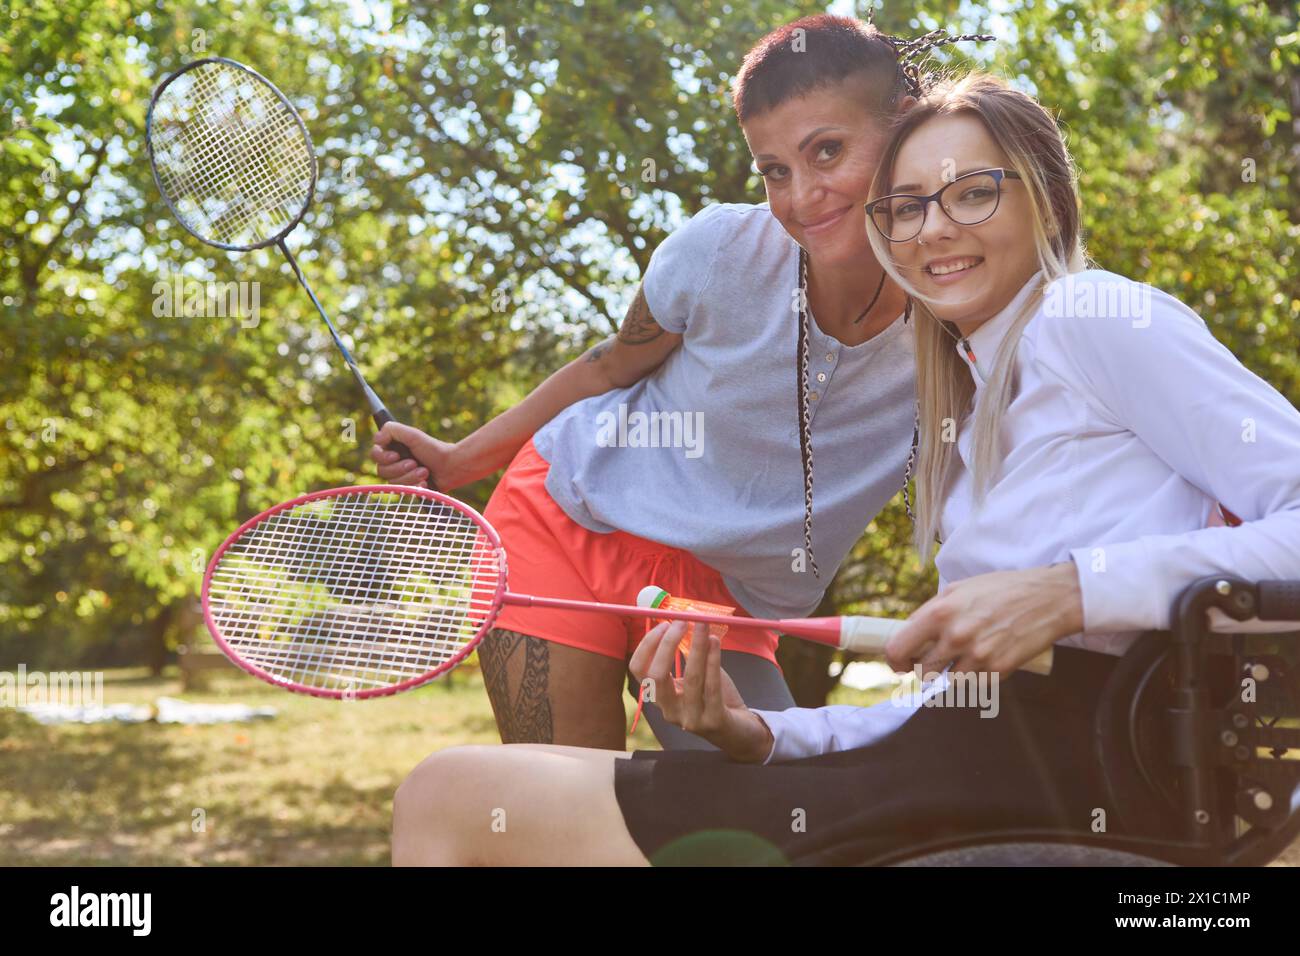 A person in a wheelchair enjoys playing badminton with a standing friend outdoors, exemplifying inclusion and adaptability. Stock Photo